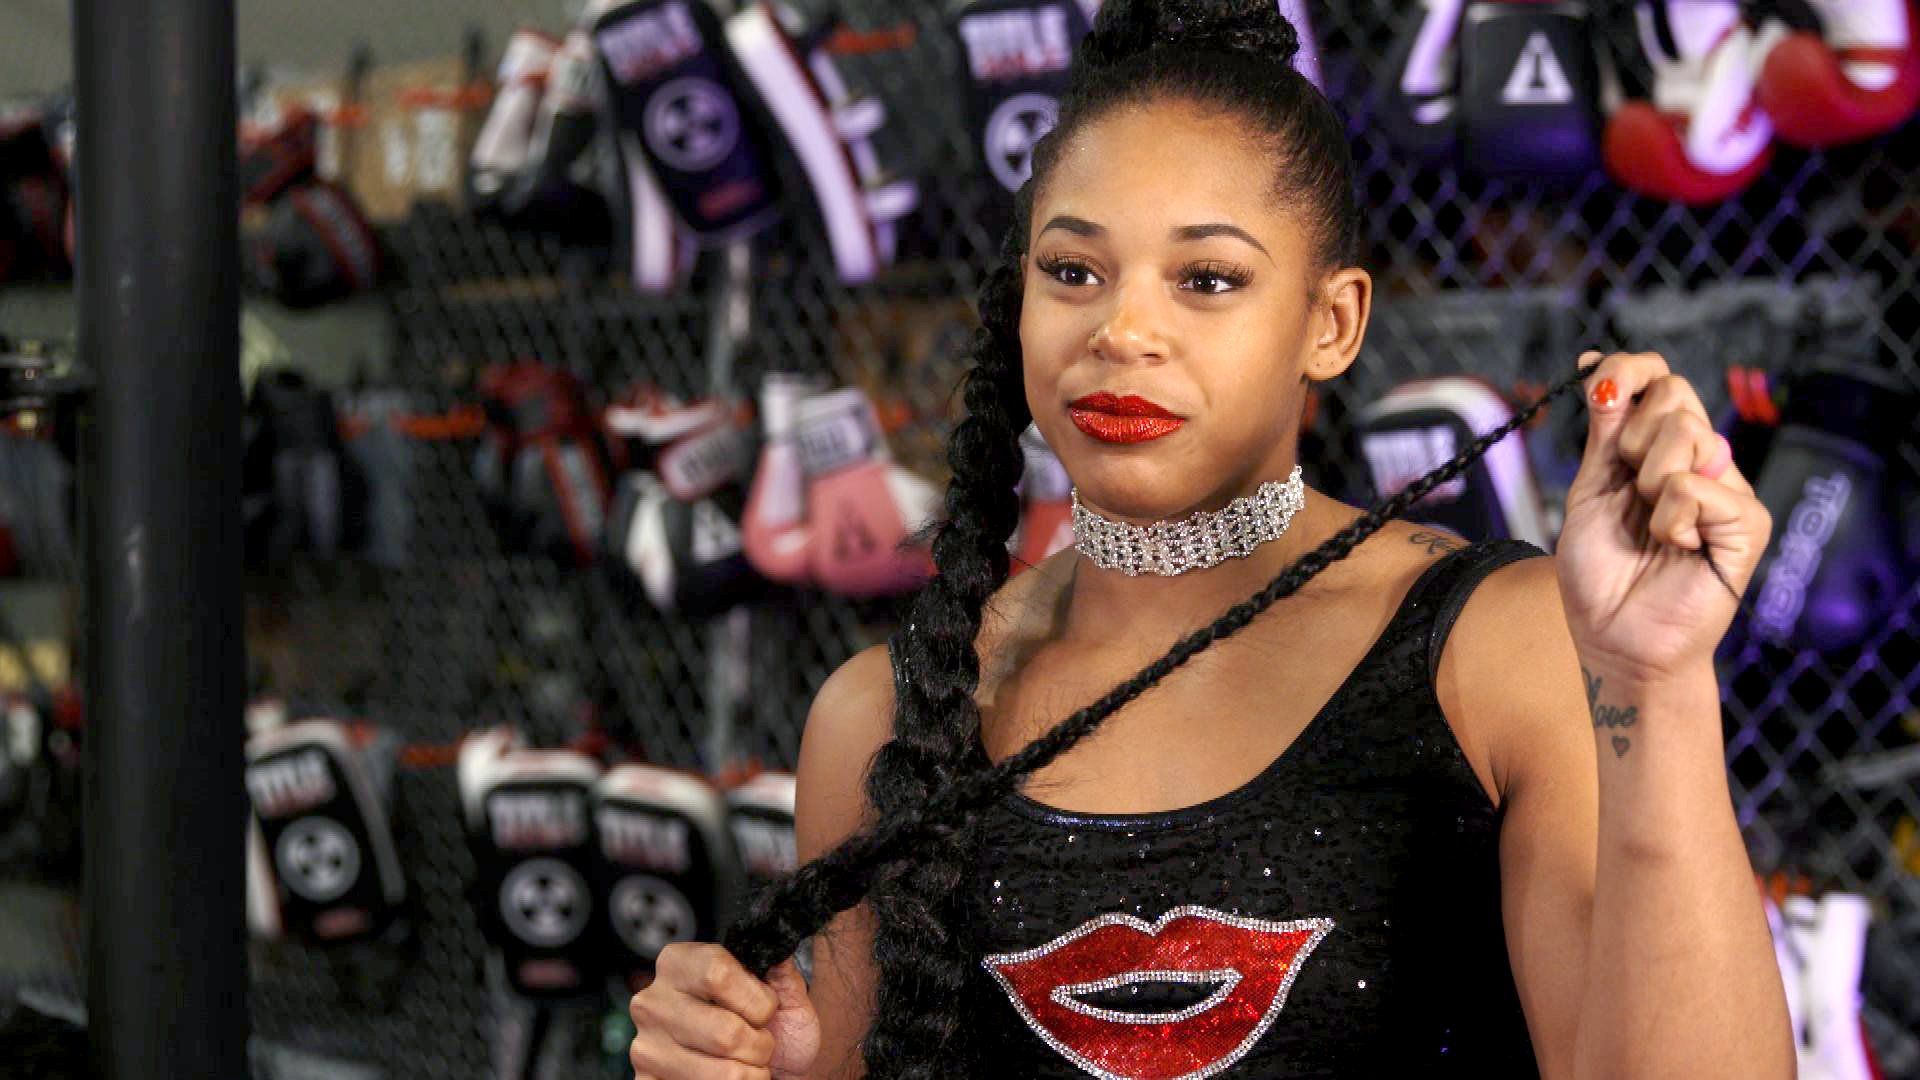 A family history explored: Bianca Belair discusses her influential